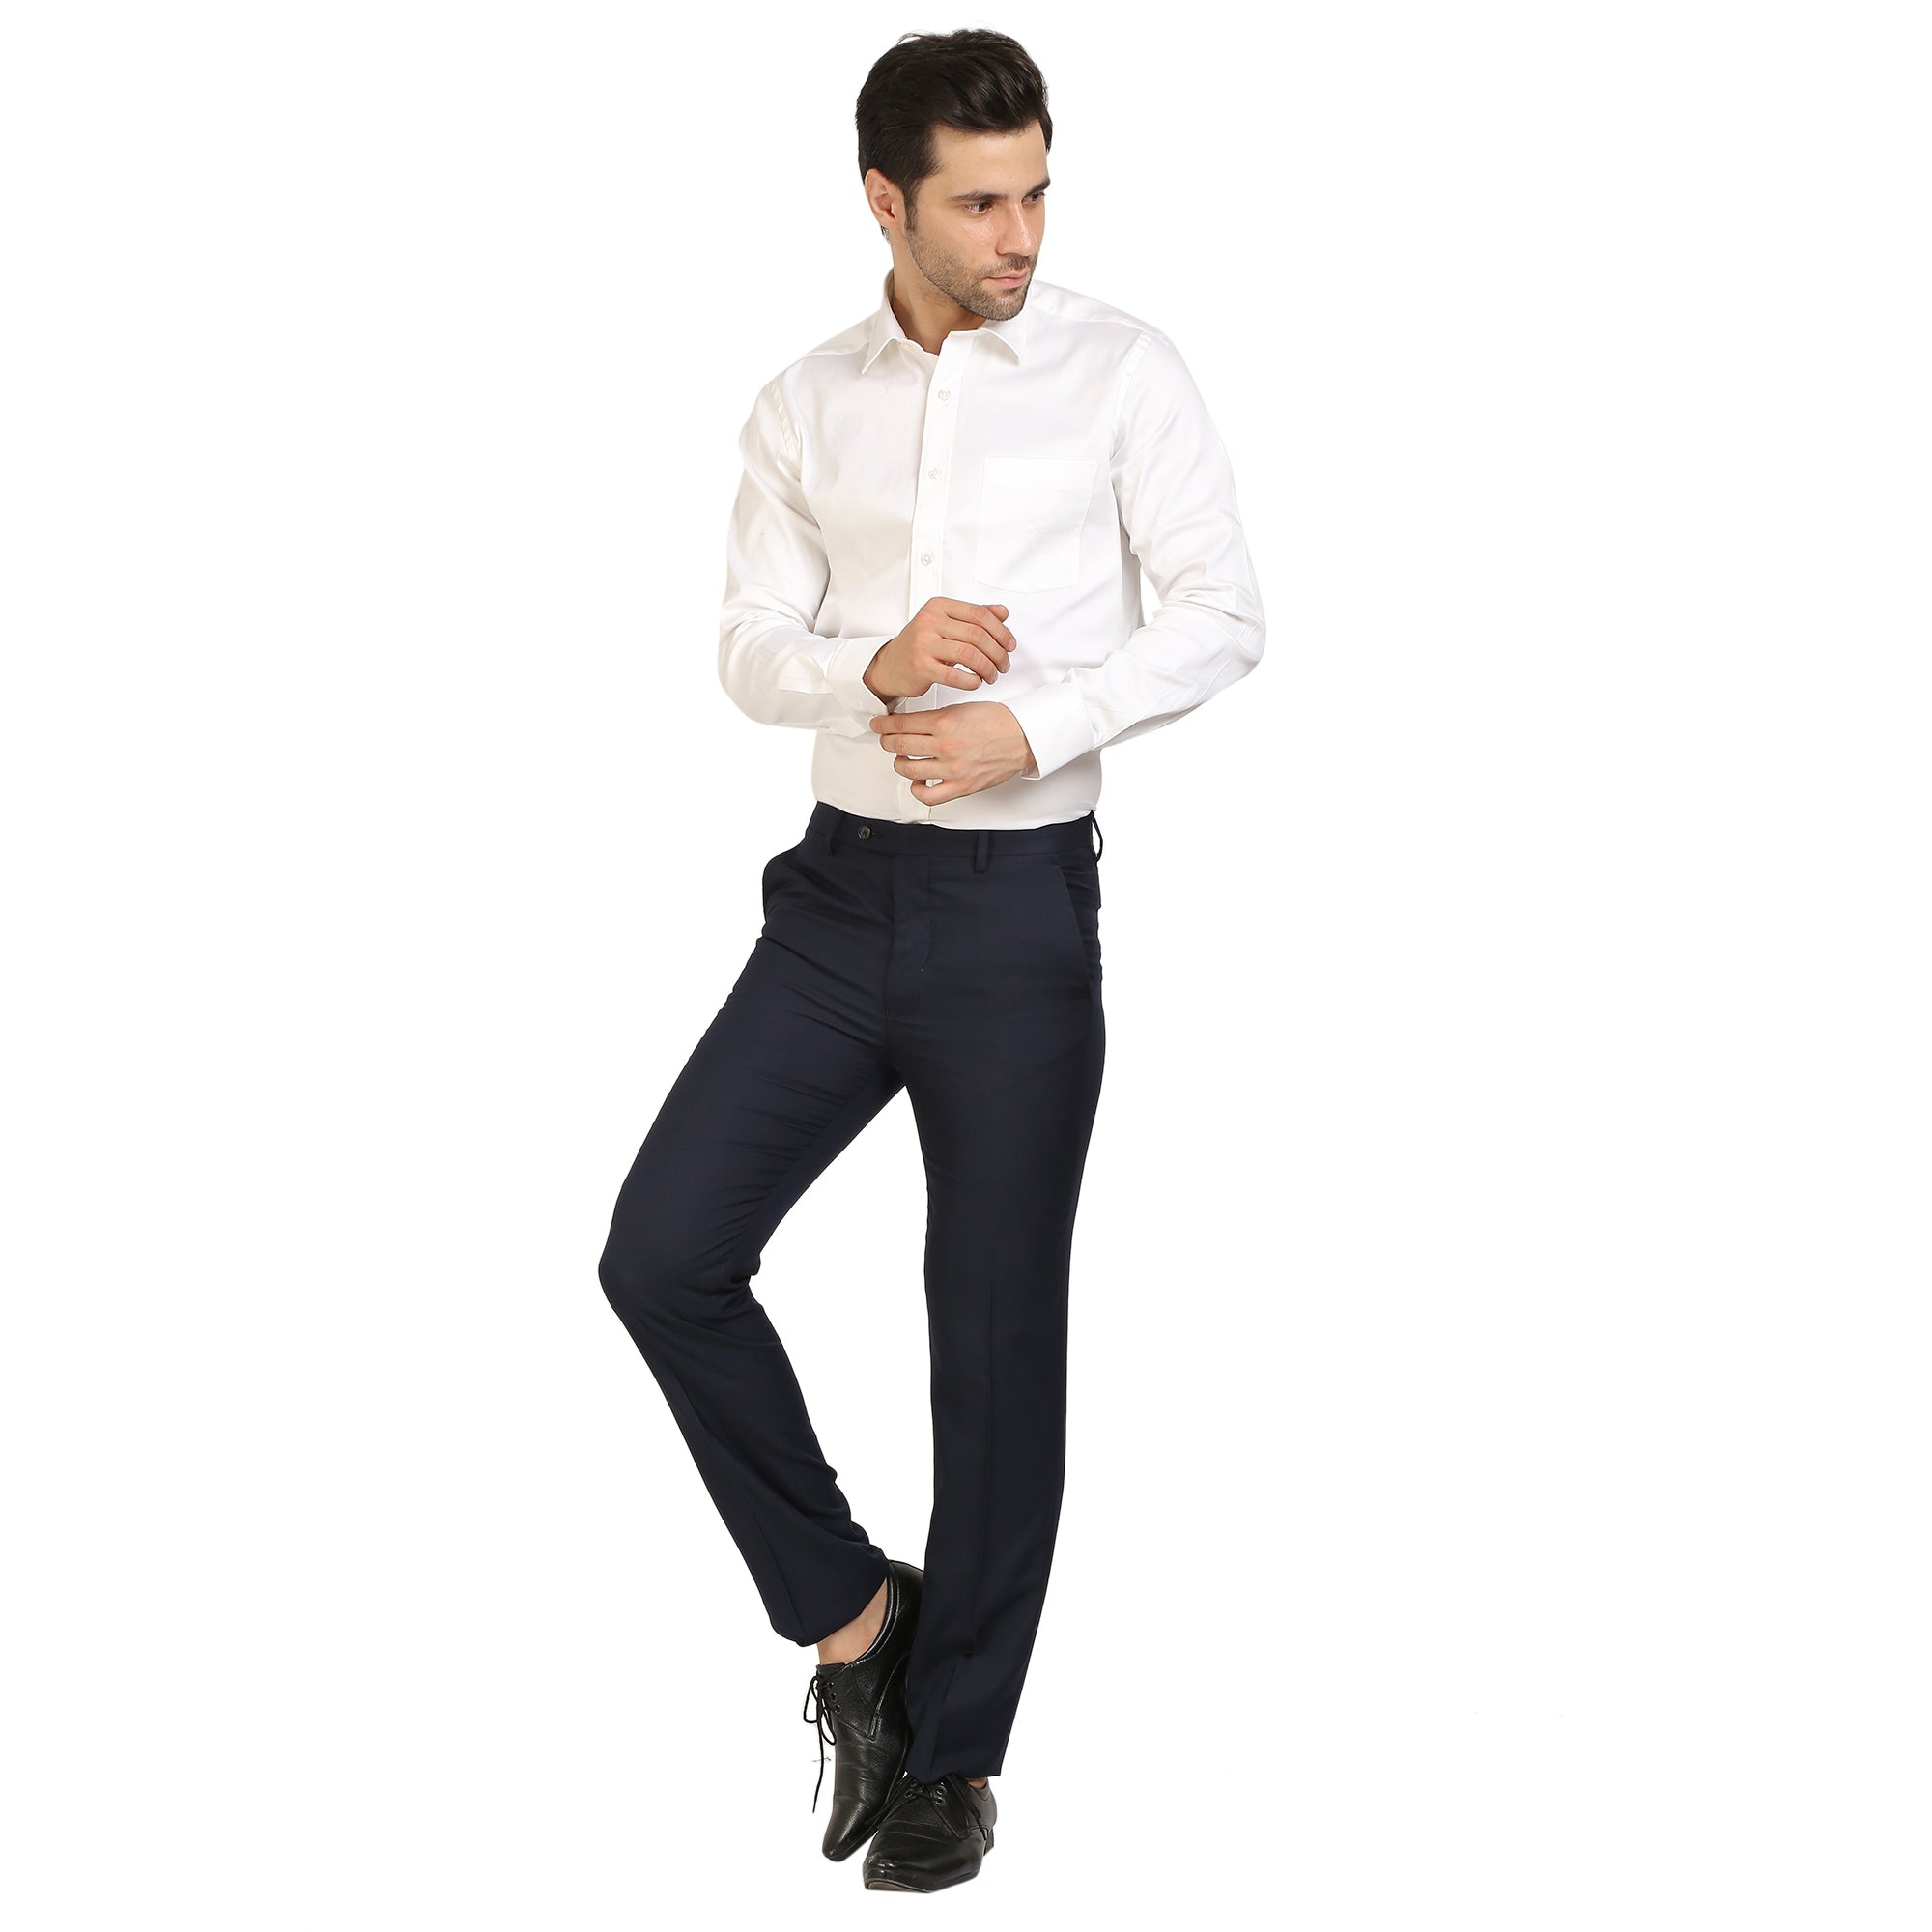 49% OFF on Givo Beige Casual Trouser on Jabong | PaisaWapas.com